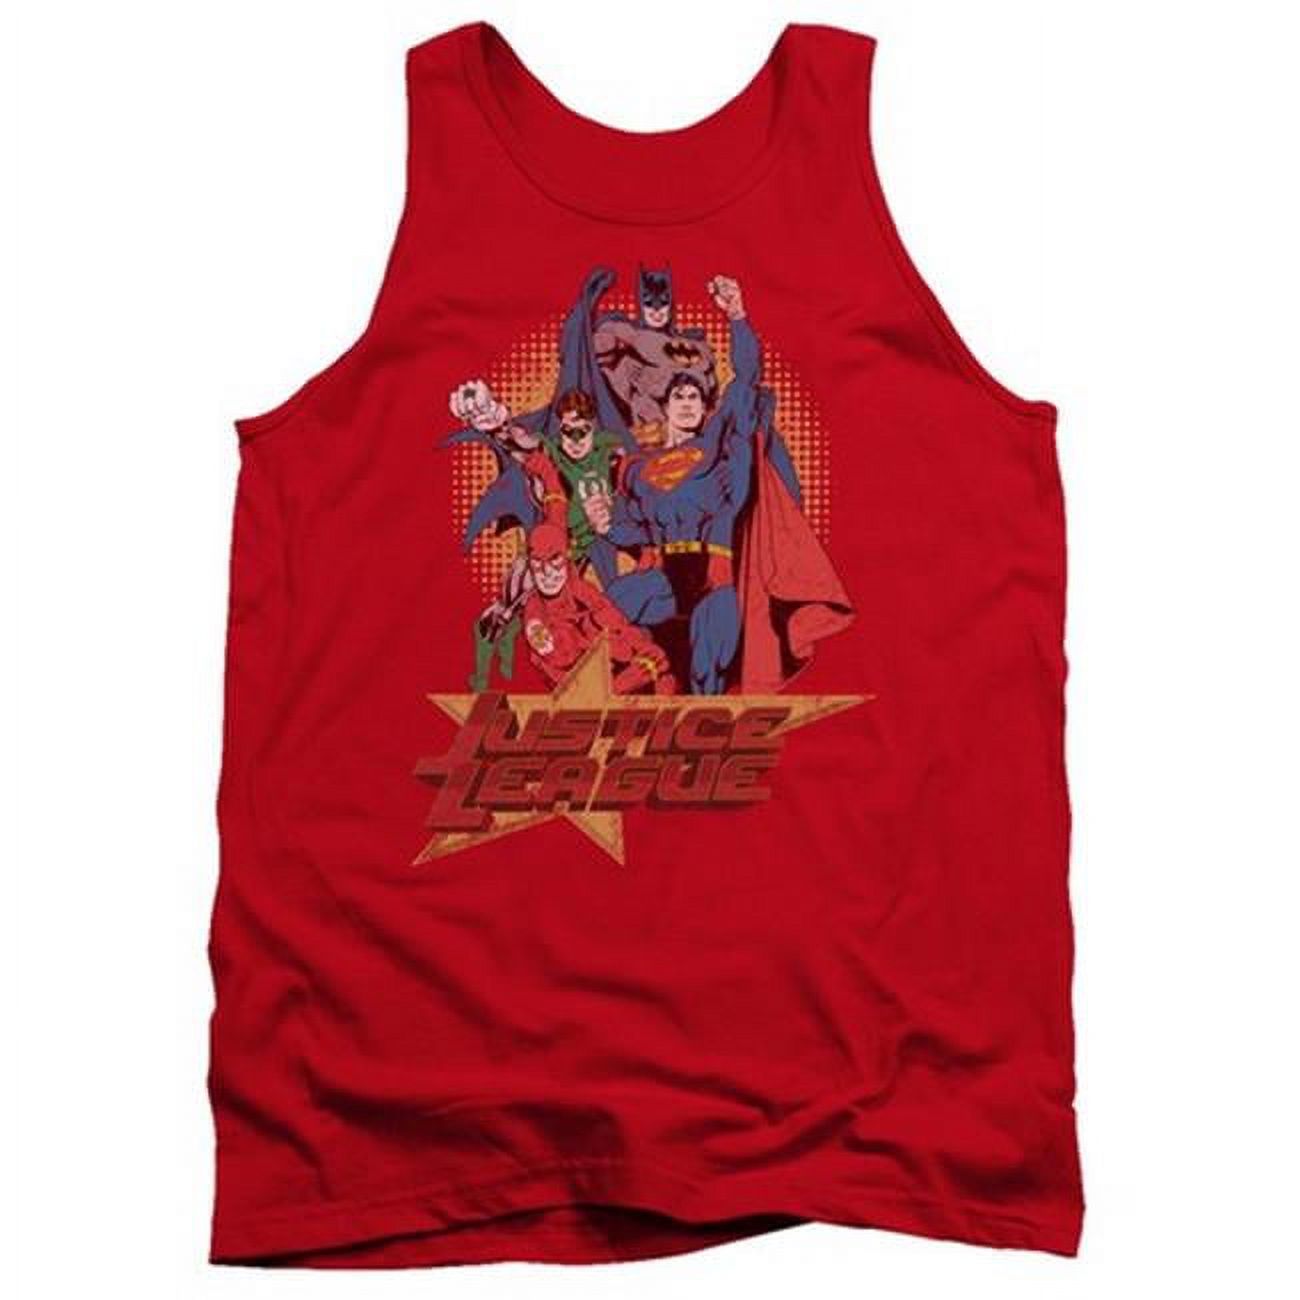 Trevco Jla-Raise Your Fist Adult Tank Top- Red - 2X - image 1 of 1